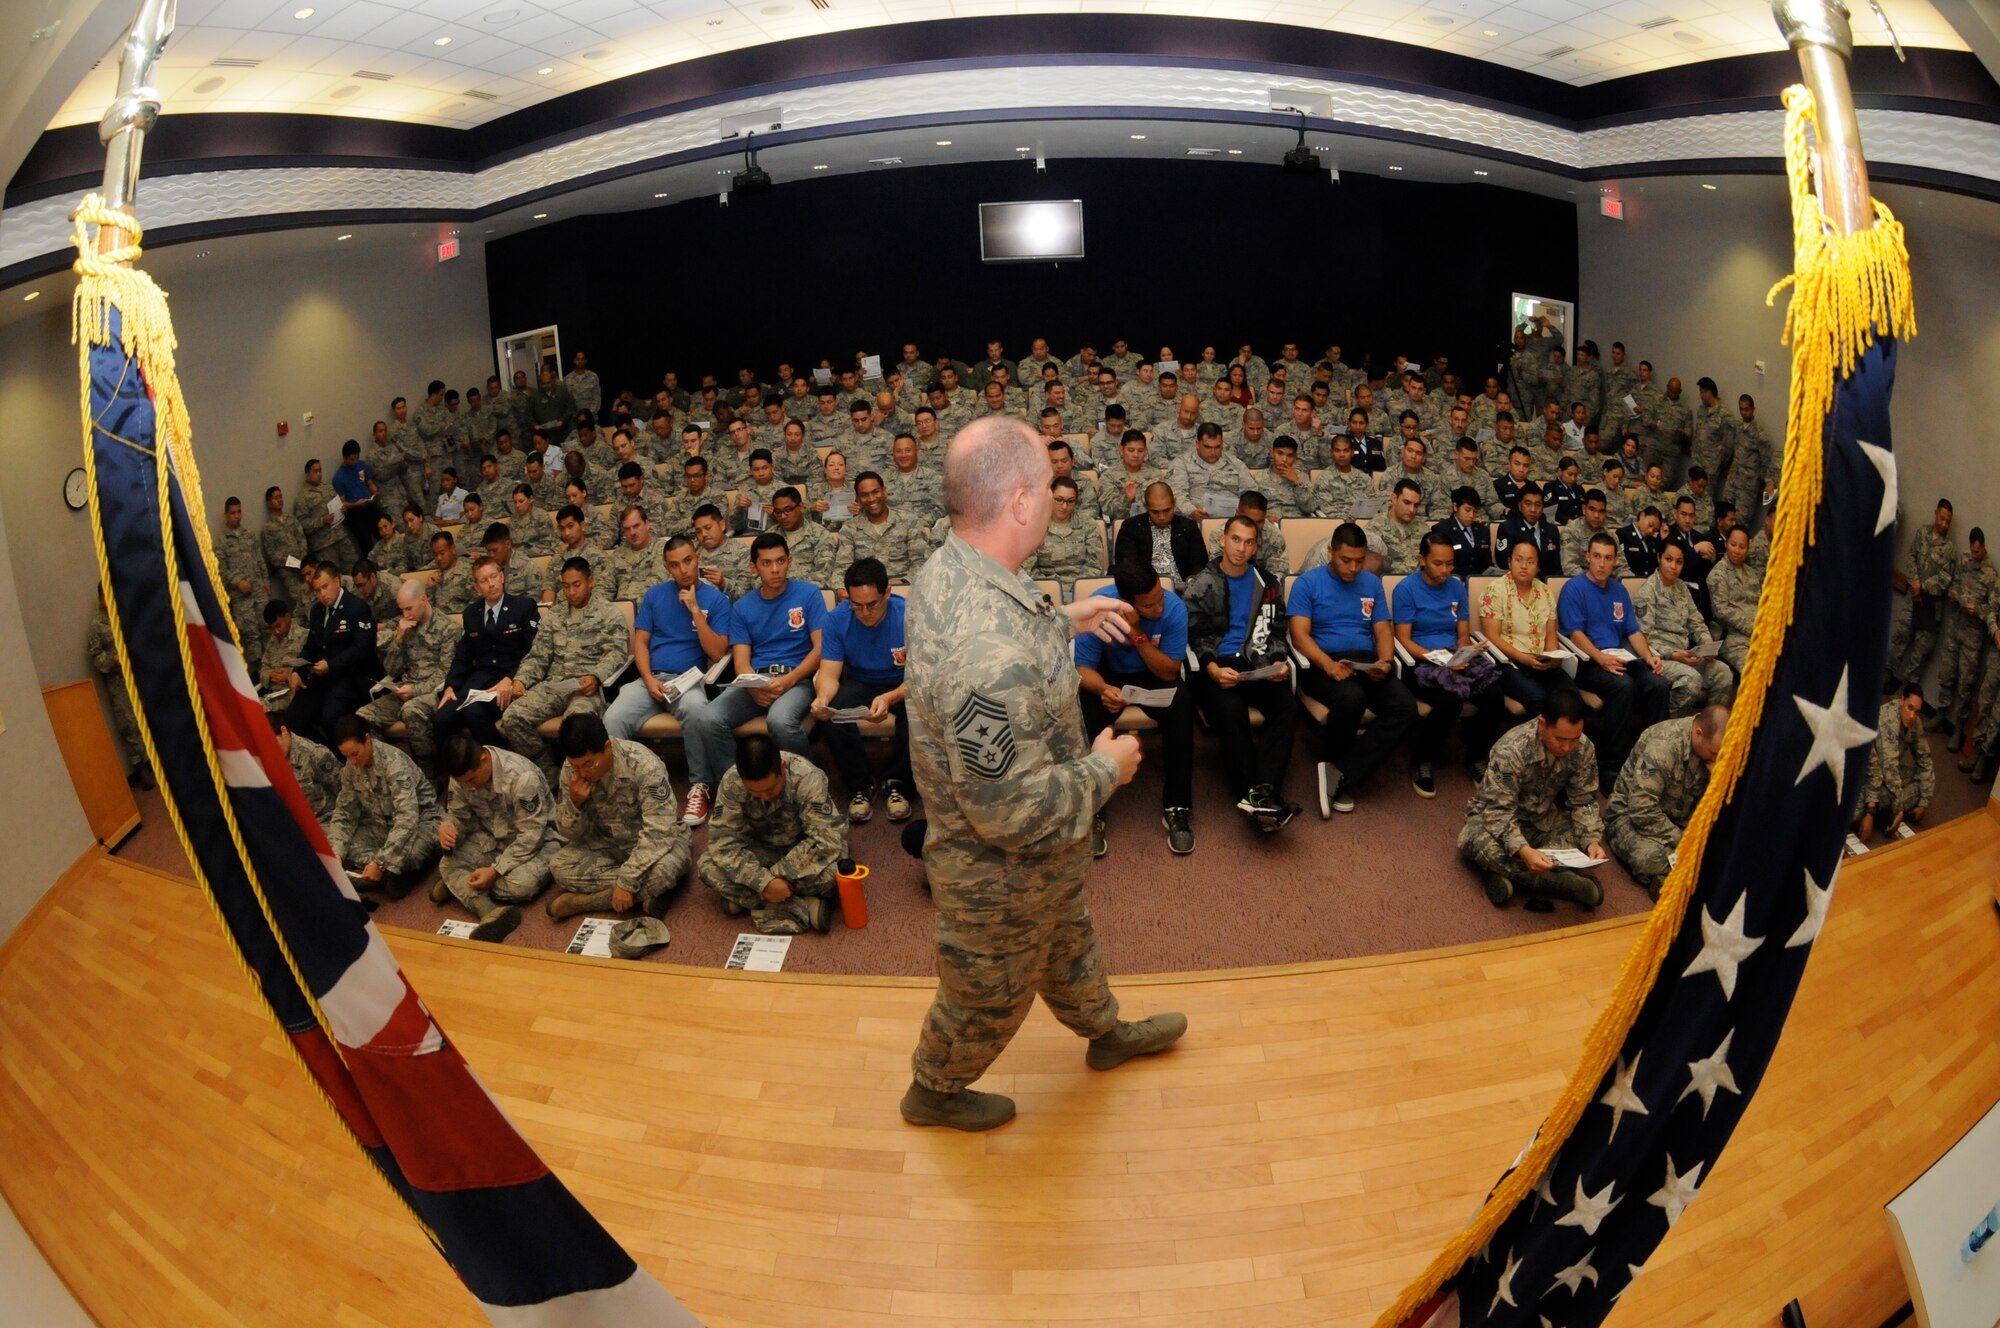 U.S. Air Force Chief Master Sgt. James W. Hotaling, command chief master sergeant of the Air National Guard, address Airman from the 154 Wing, Hawaii Air National Guard, during a Town Hall Meeting at Joint Base Pearl Harbor Hickam on Nov. 9, 2014.  Hotaling encouraged the Airmen to renew their commitment to the profession of arms through the Air Force core values, focus on performance and training, and the deliberate development of Airmen. (U.S. Air National Guard photo by Airman 1st Class Robert Cabuco)